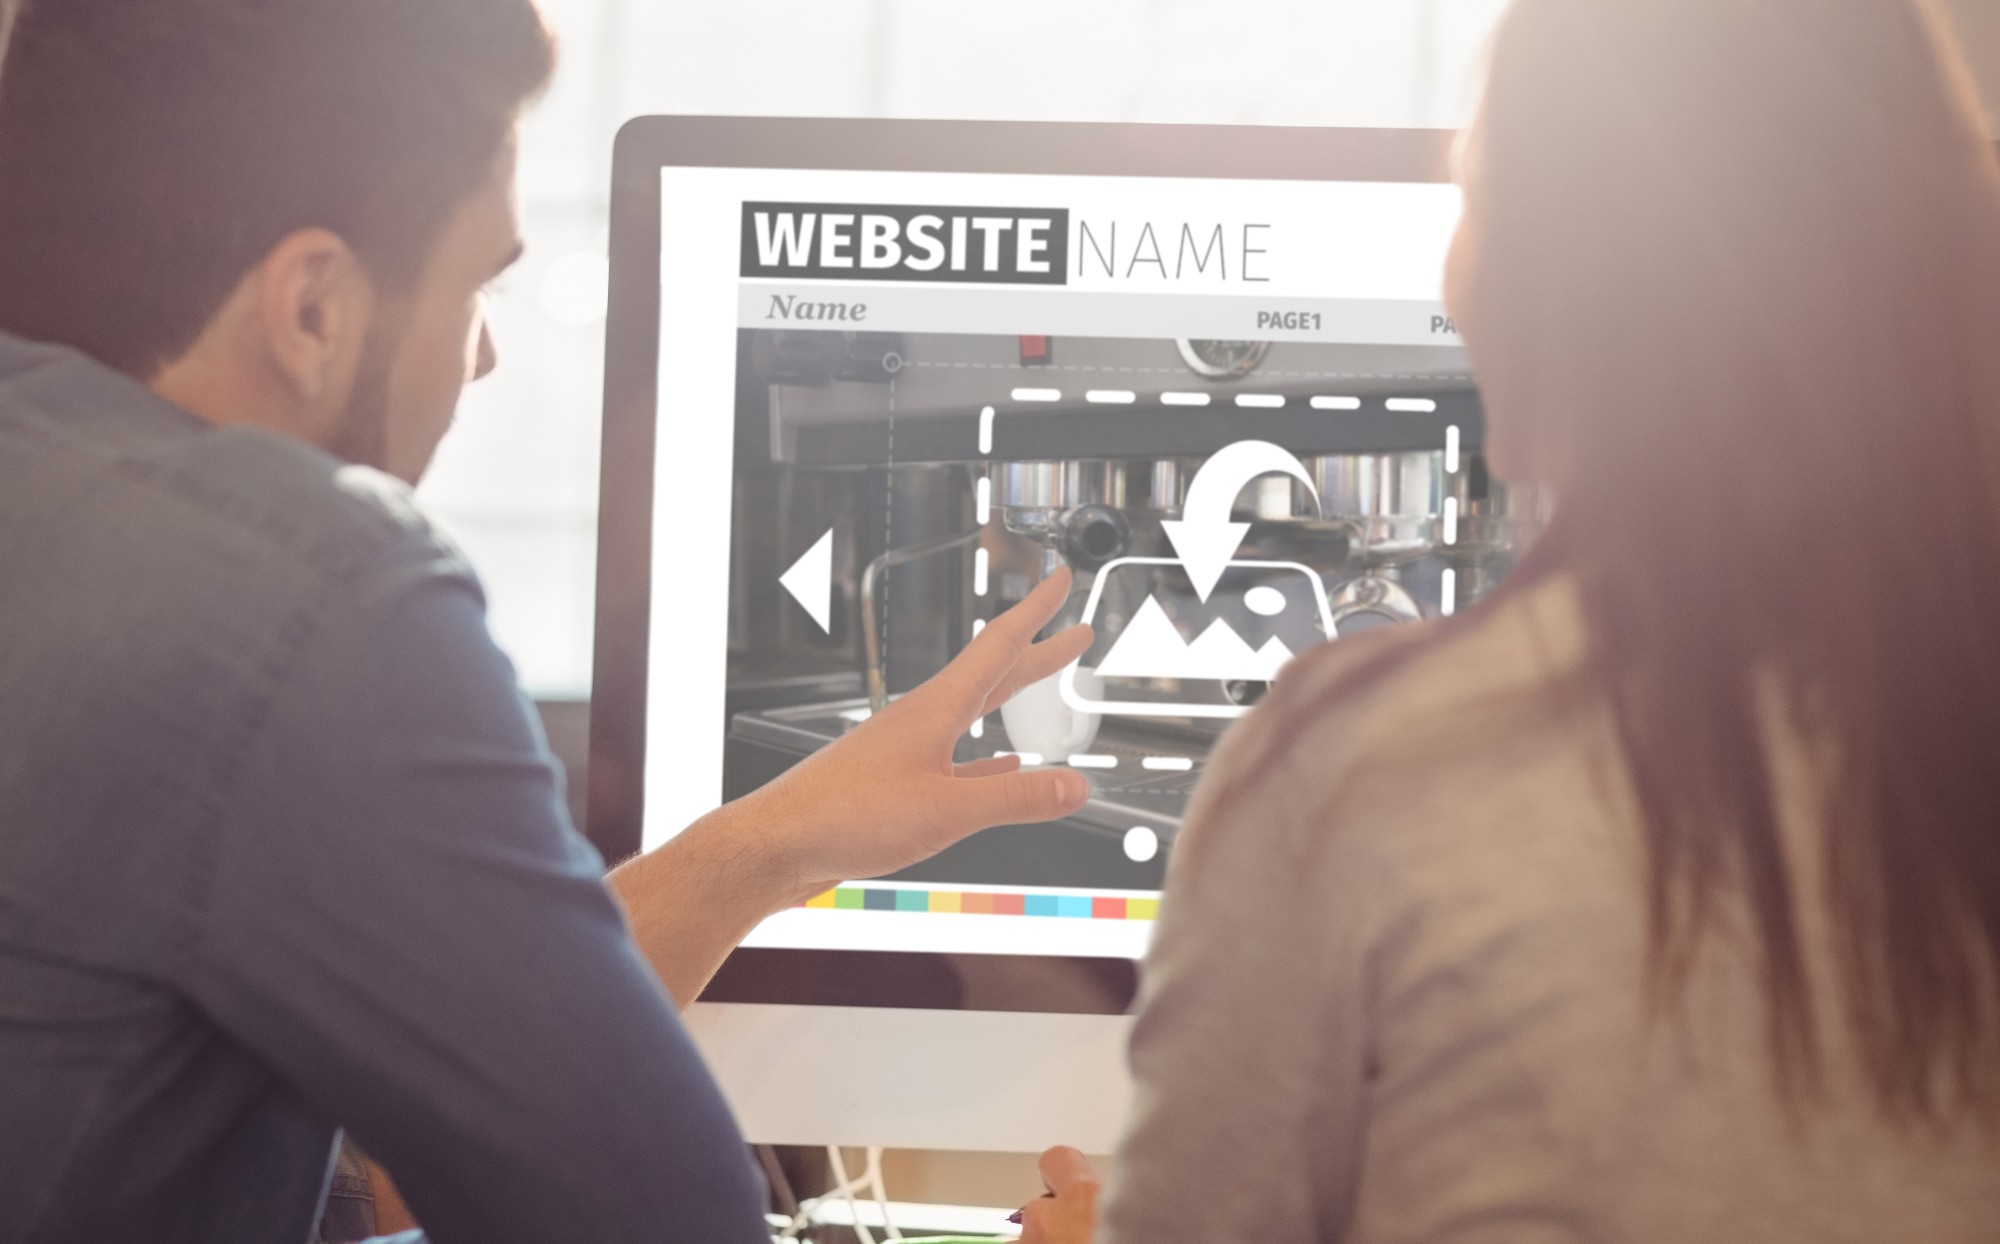 5 Web Design Trends to Look Out for in 2022